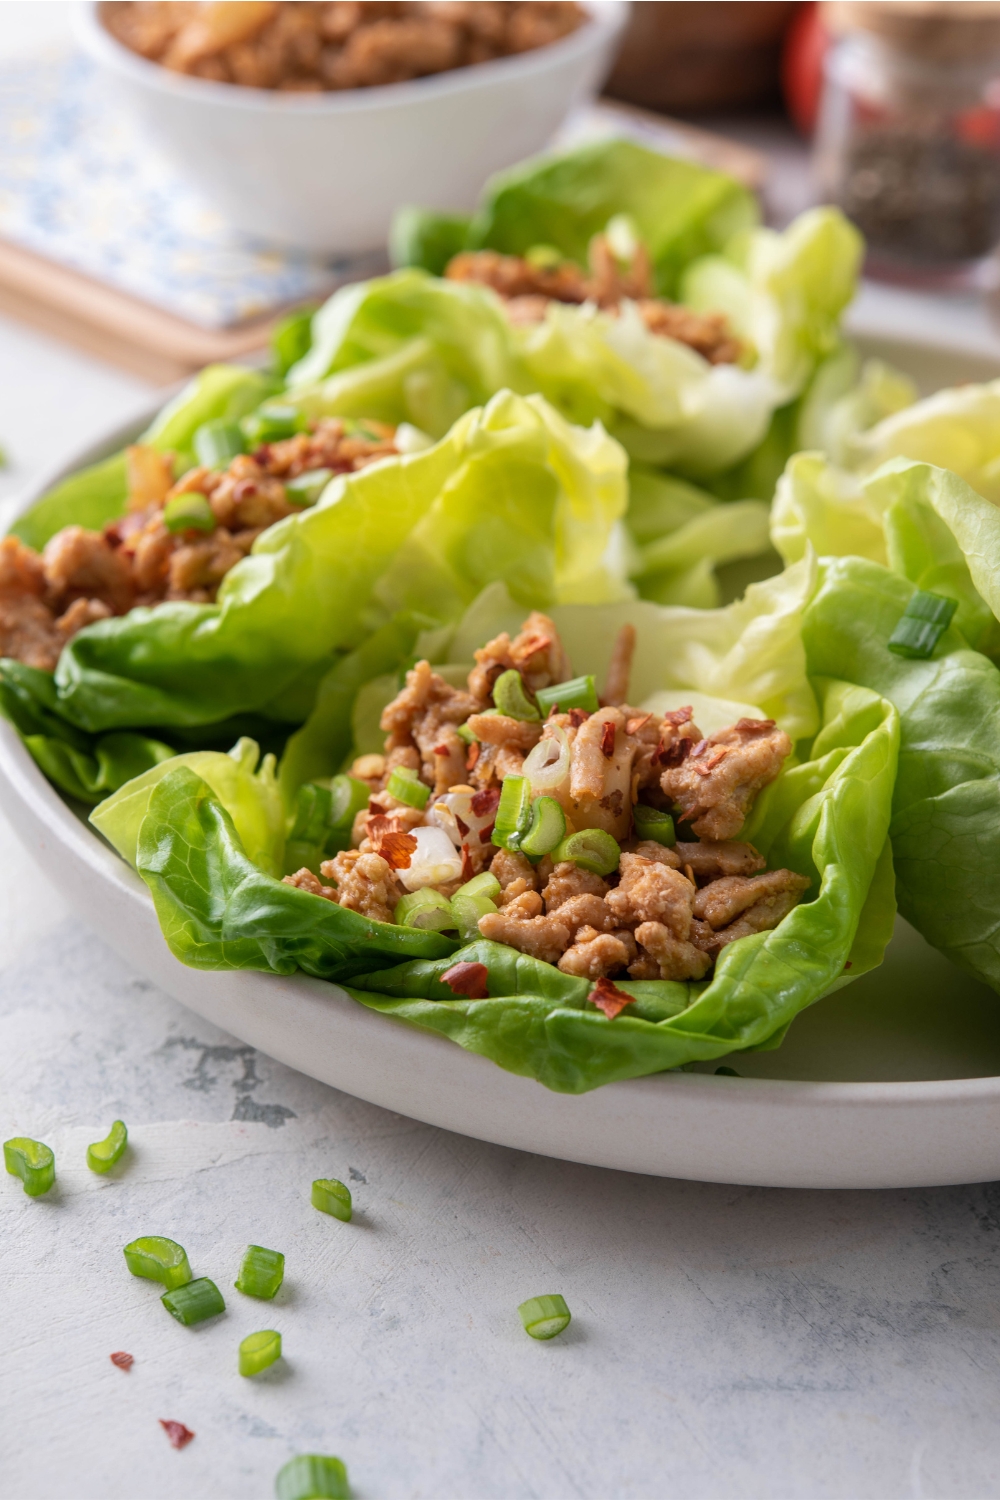 Close up of lettuce wraps stuffed with ground turkey, brazil nuts, and diced green onion.